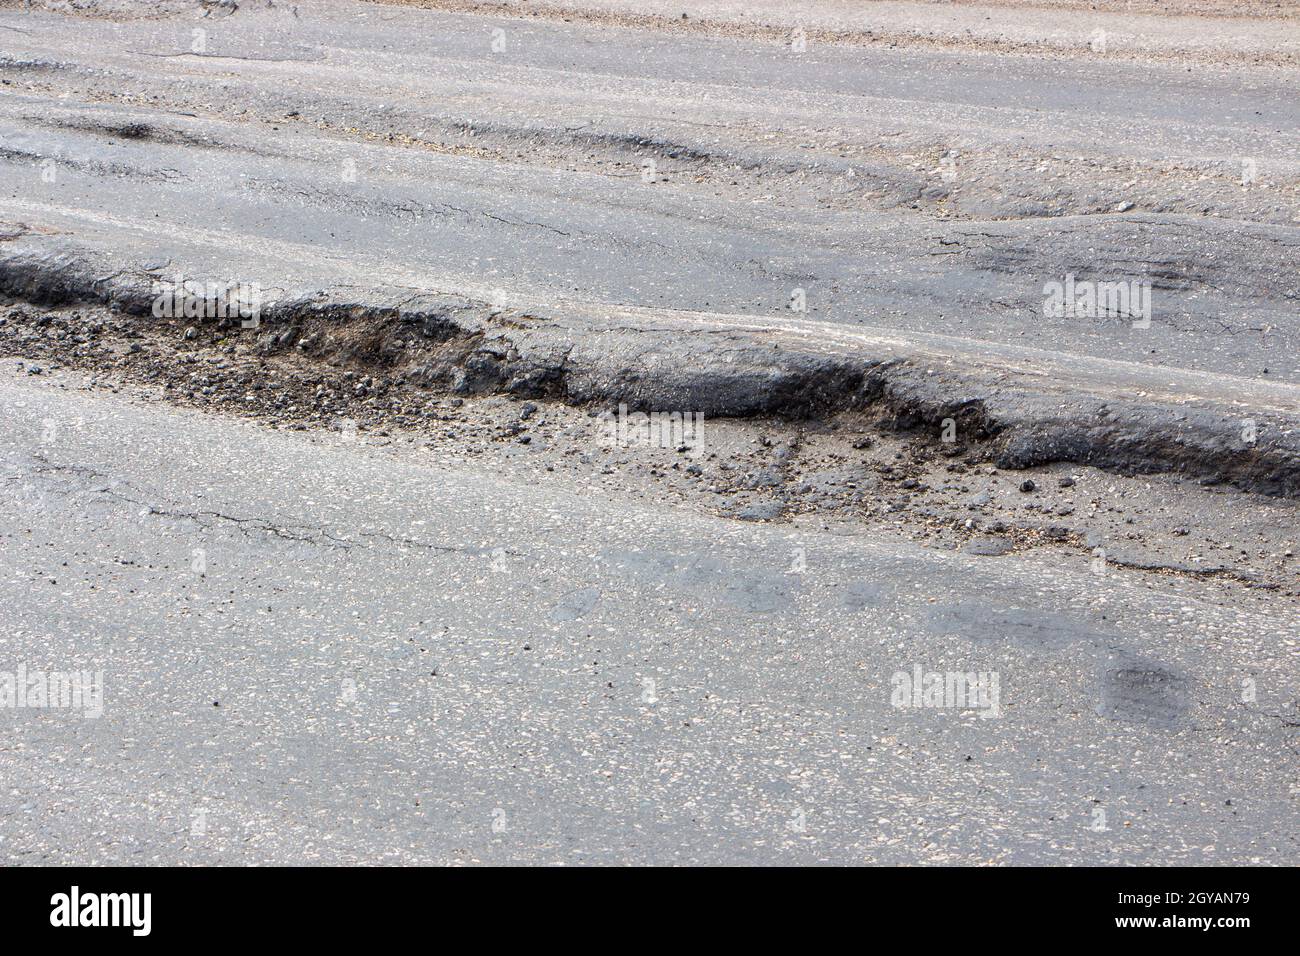 Poor condition of the road surface. Spring season. Hole in the asphalt, risk of movement by car, bad asphalt, dangerous road, potholes in asphalt. Moa Stock Photo